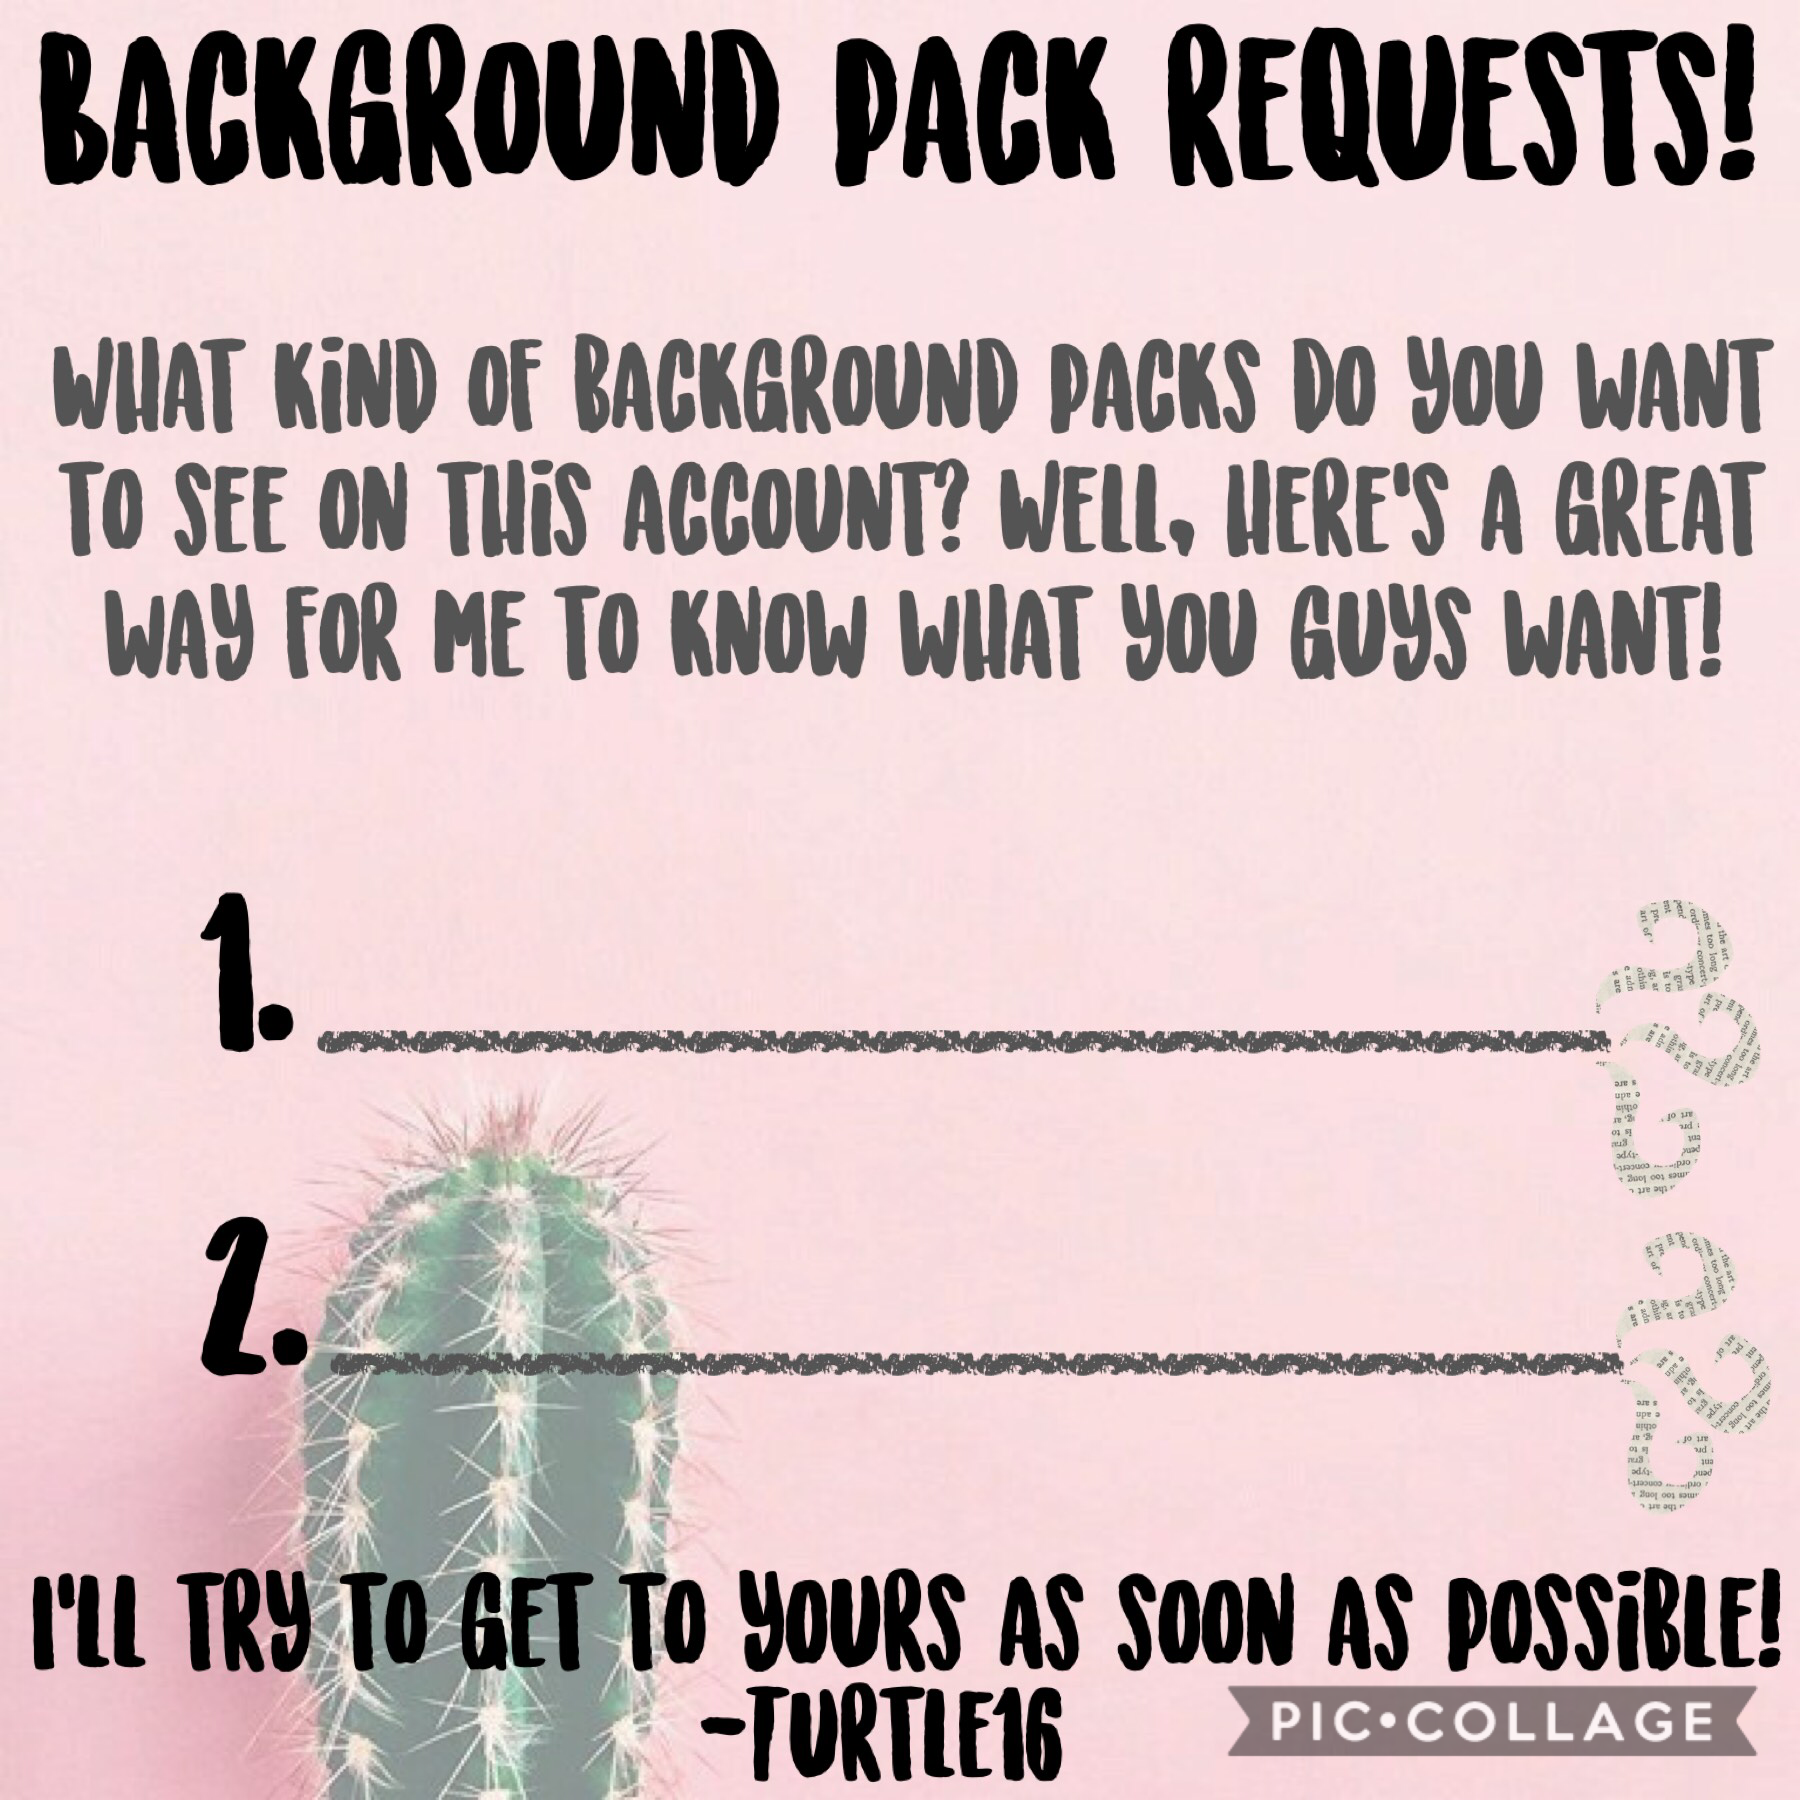 Wassup, it’s your girl, Turtle16 comin at ya with a background pack request that I can do, only open for a limited time only!